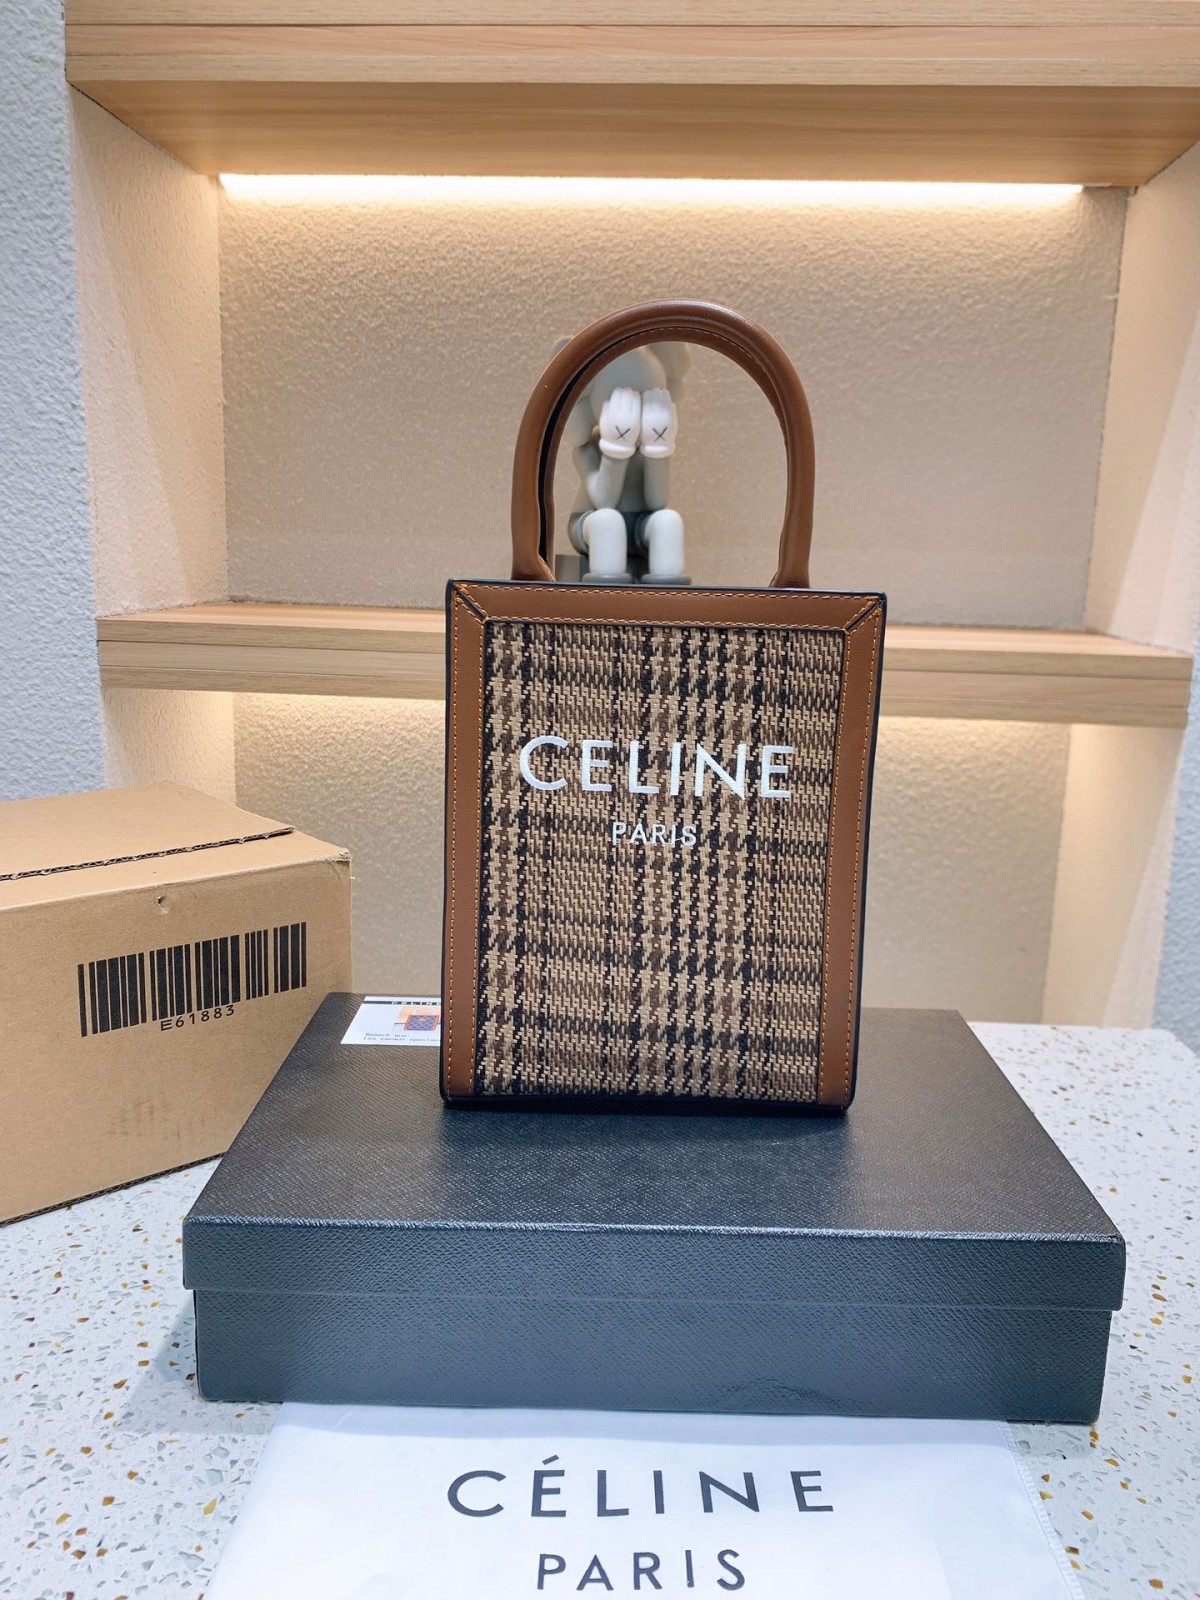 This Celine Tote replica bags, have you seen it? (2022 Edition)-Best Quality Fake Louis Vuitton Bag Online Store, Replica designer bag ru